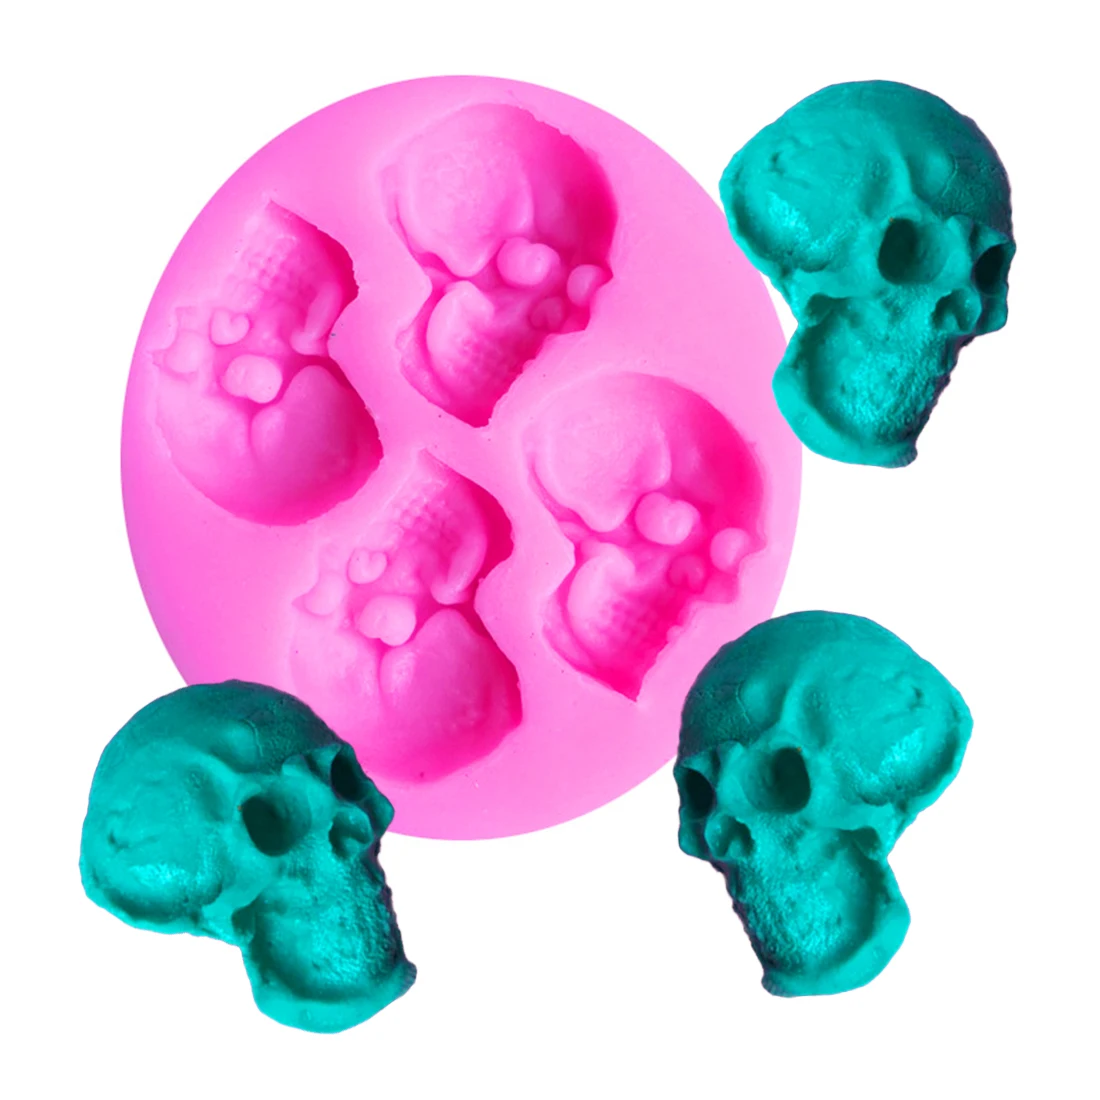 Silicone Mold 1pc Pop Halloween 3D Skull Silicone Mold Chocolate Fondant Cake Making Baking Mould,Random Color